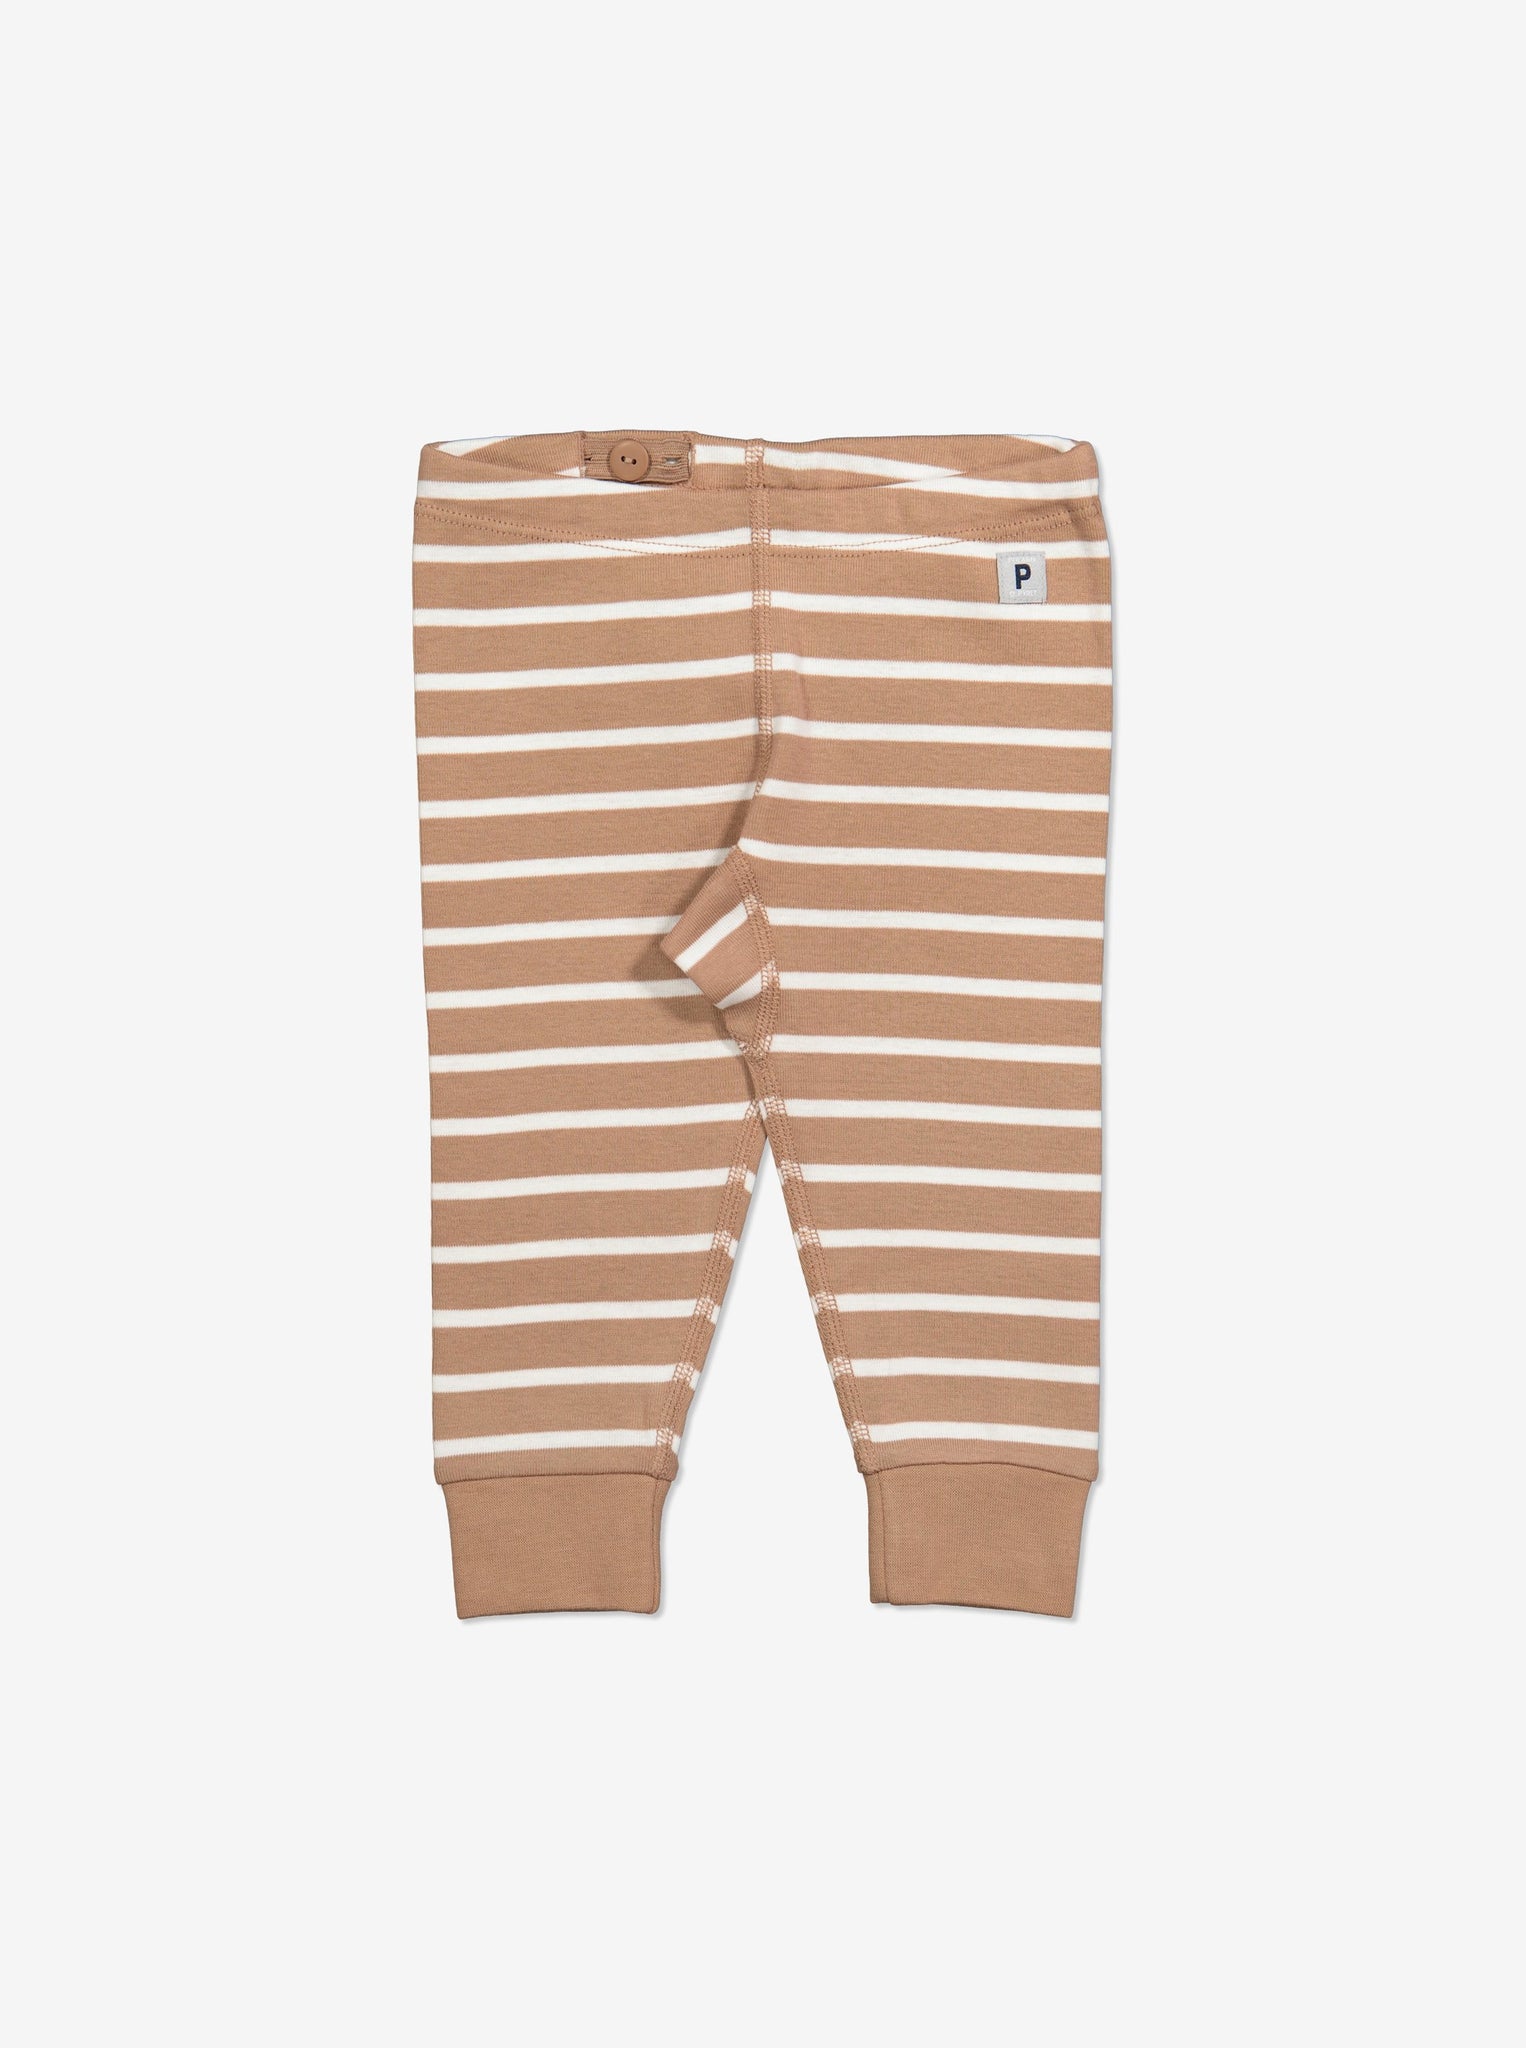  Organic Striped Brown Baby Leggings from Polarn O. Pyret Kidswear. Made with 100% organic cotton.